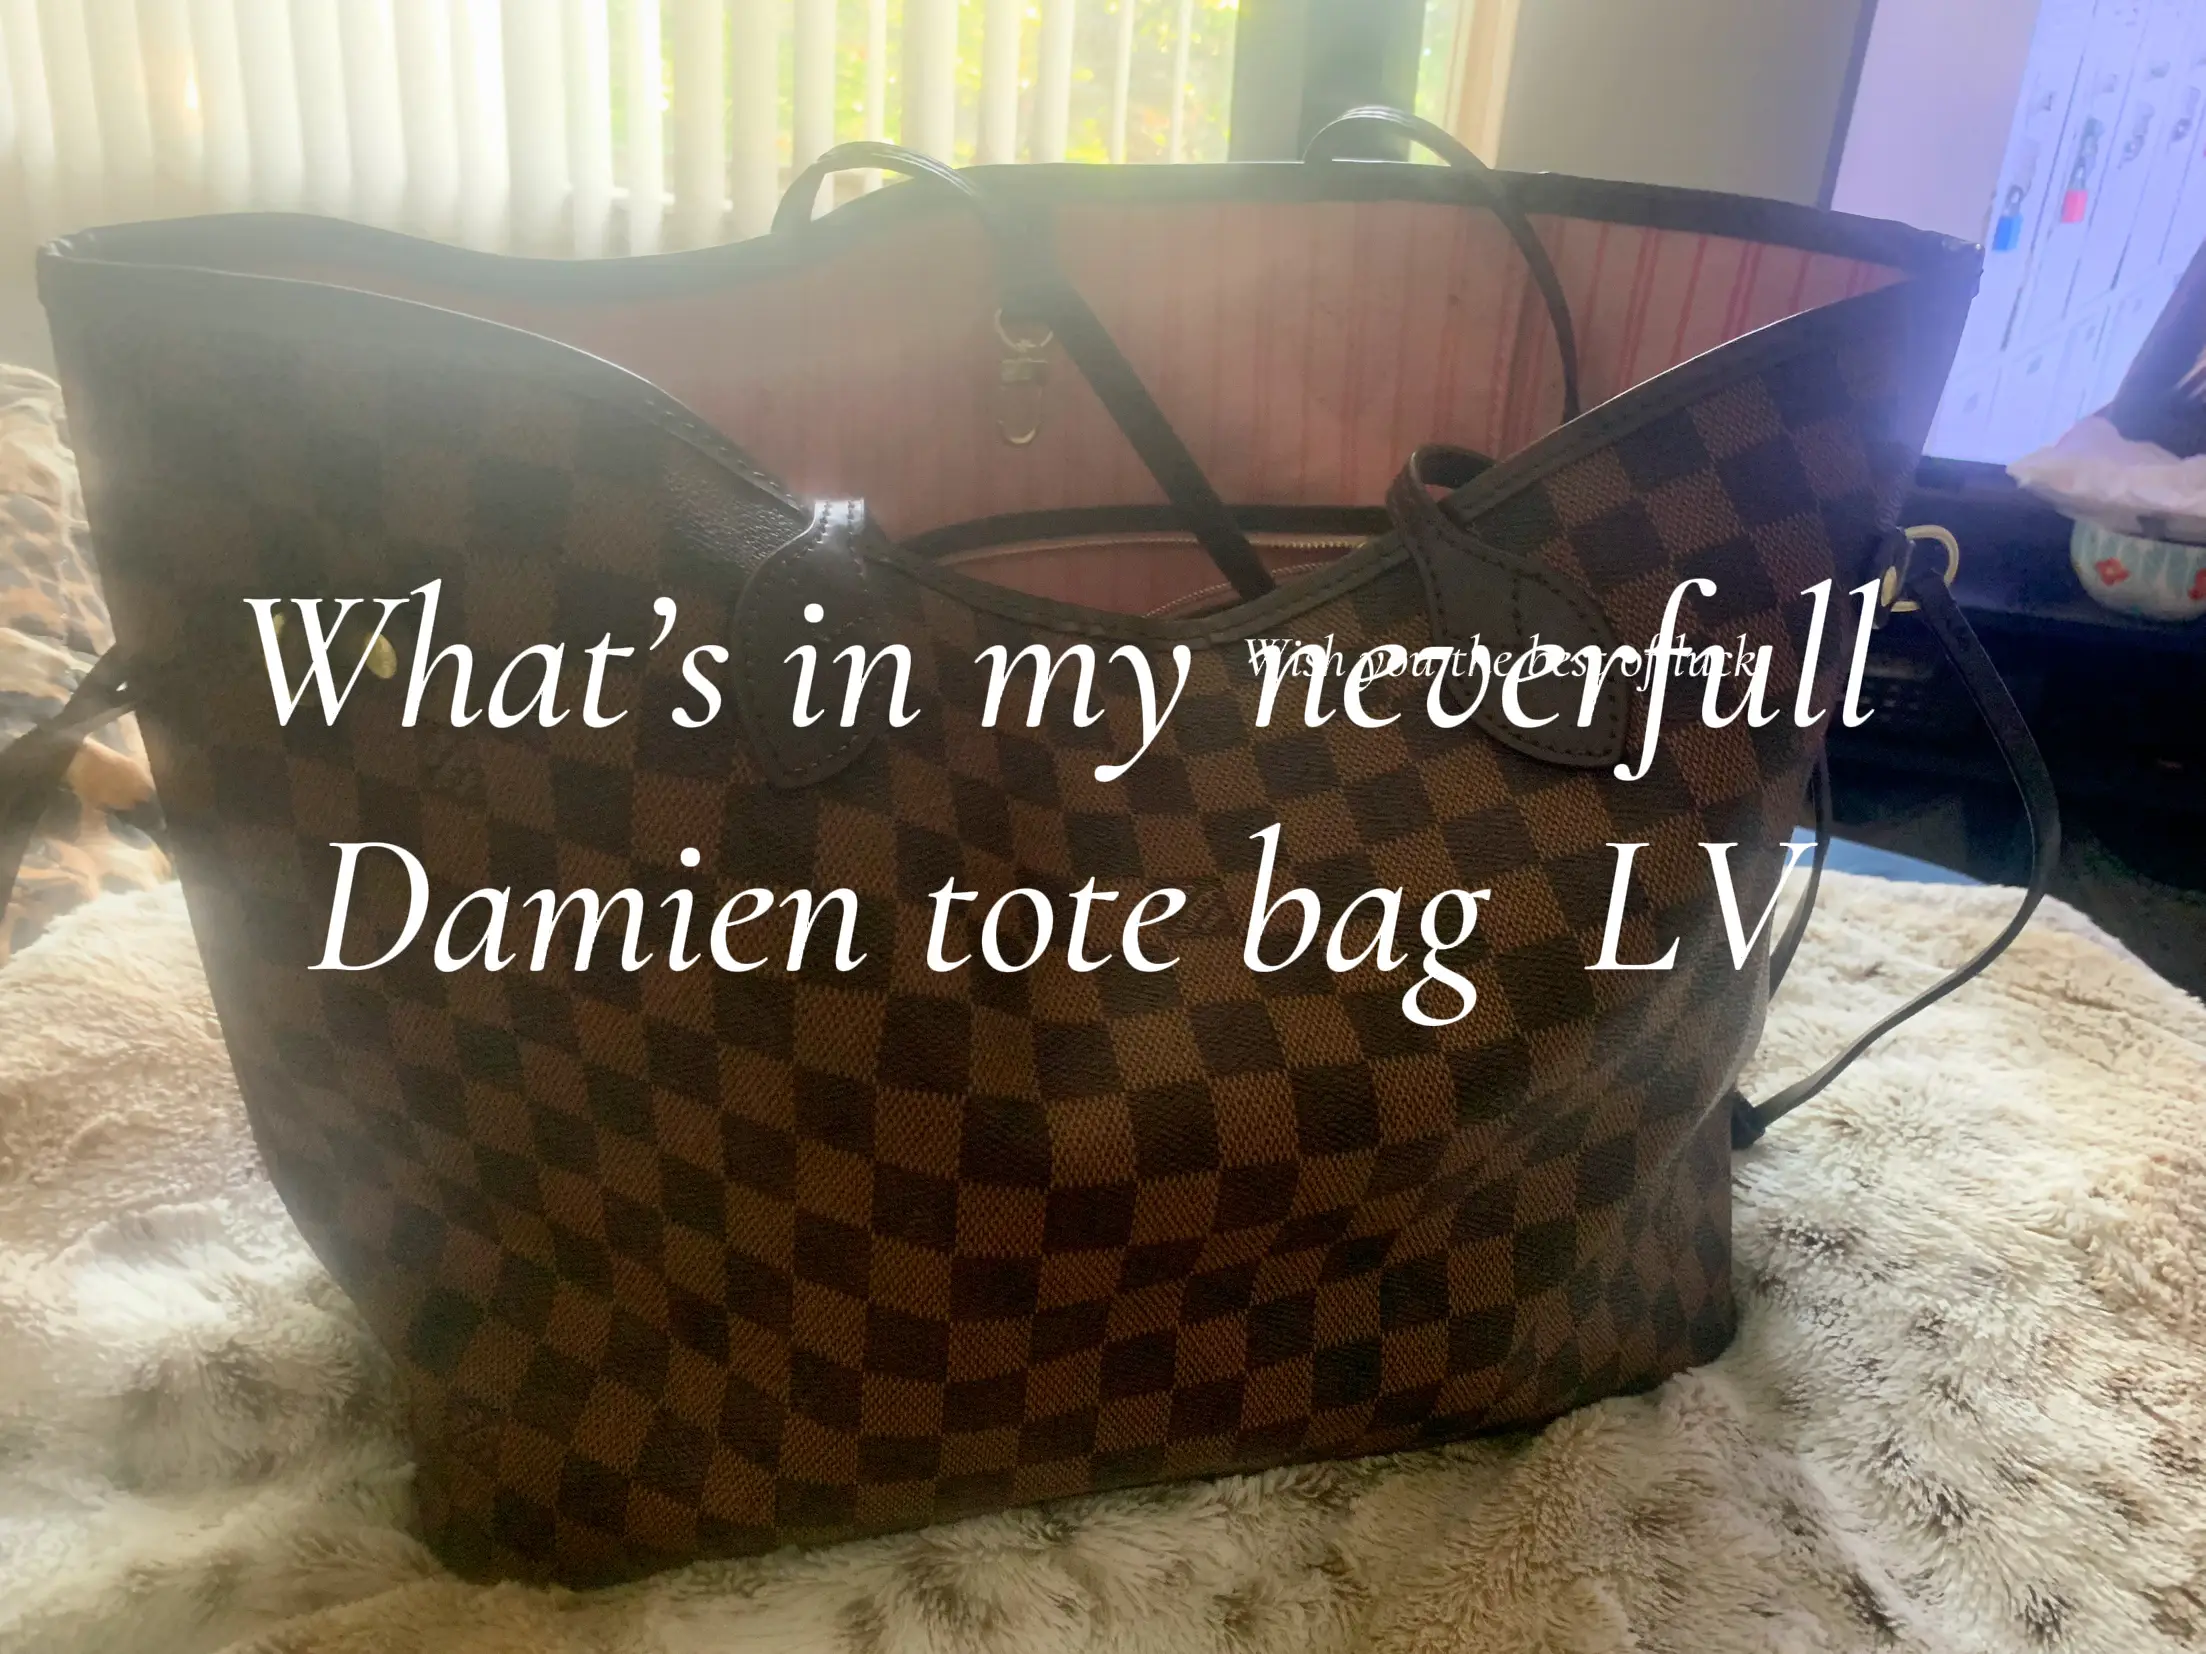 honest opinions- Is the damier ebene canvas out dated? what are